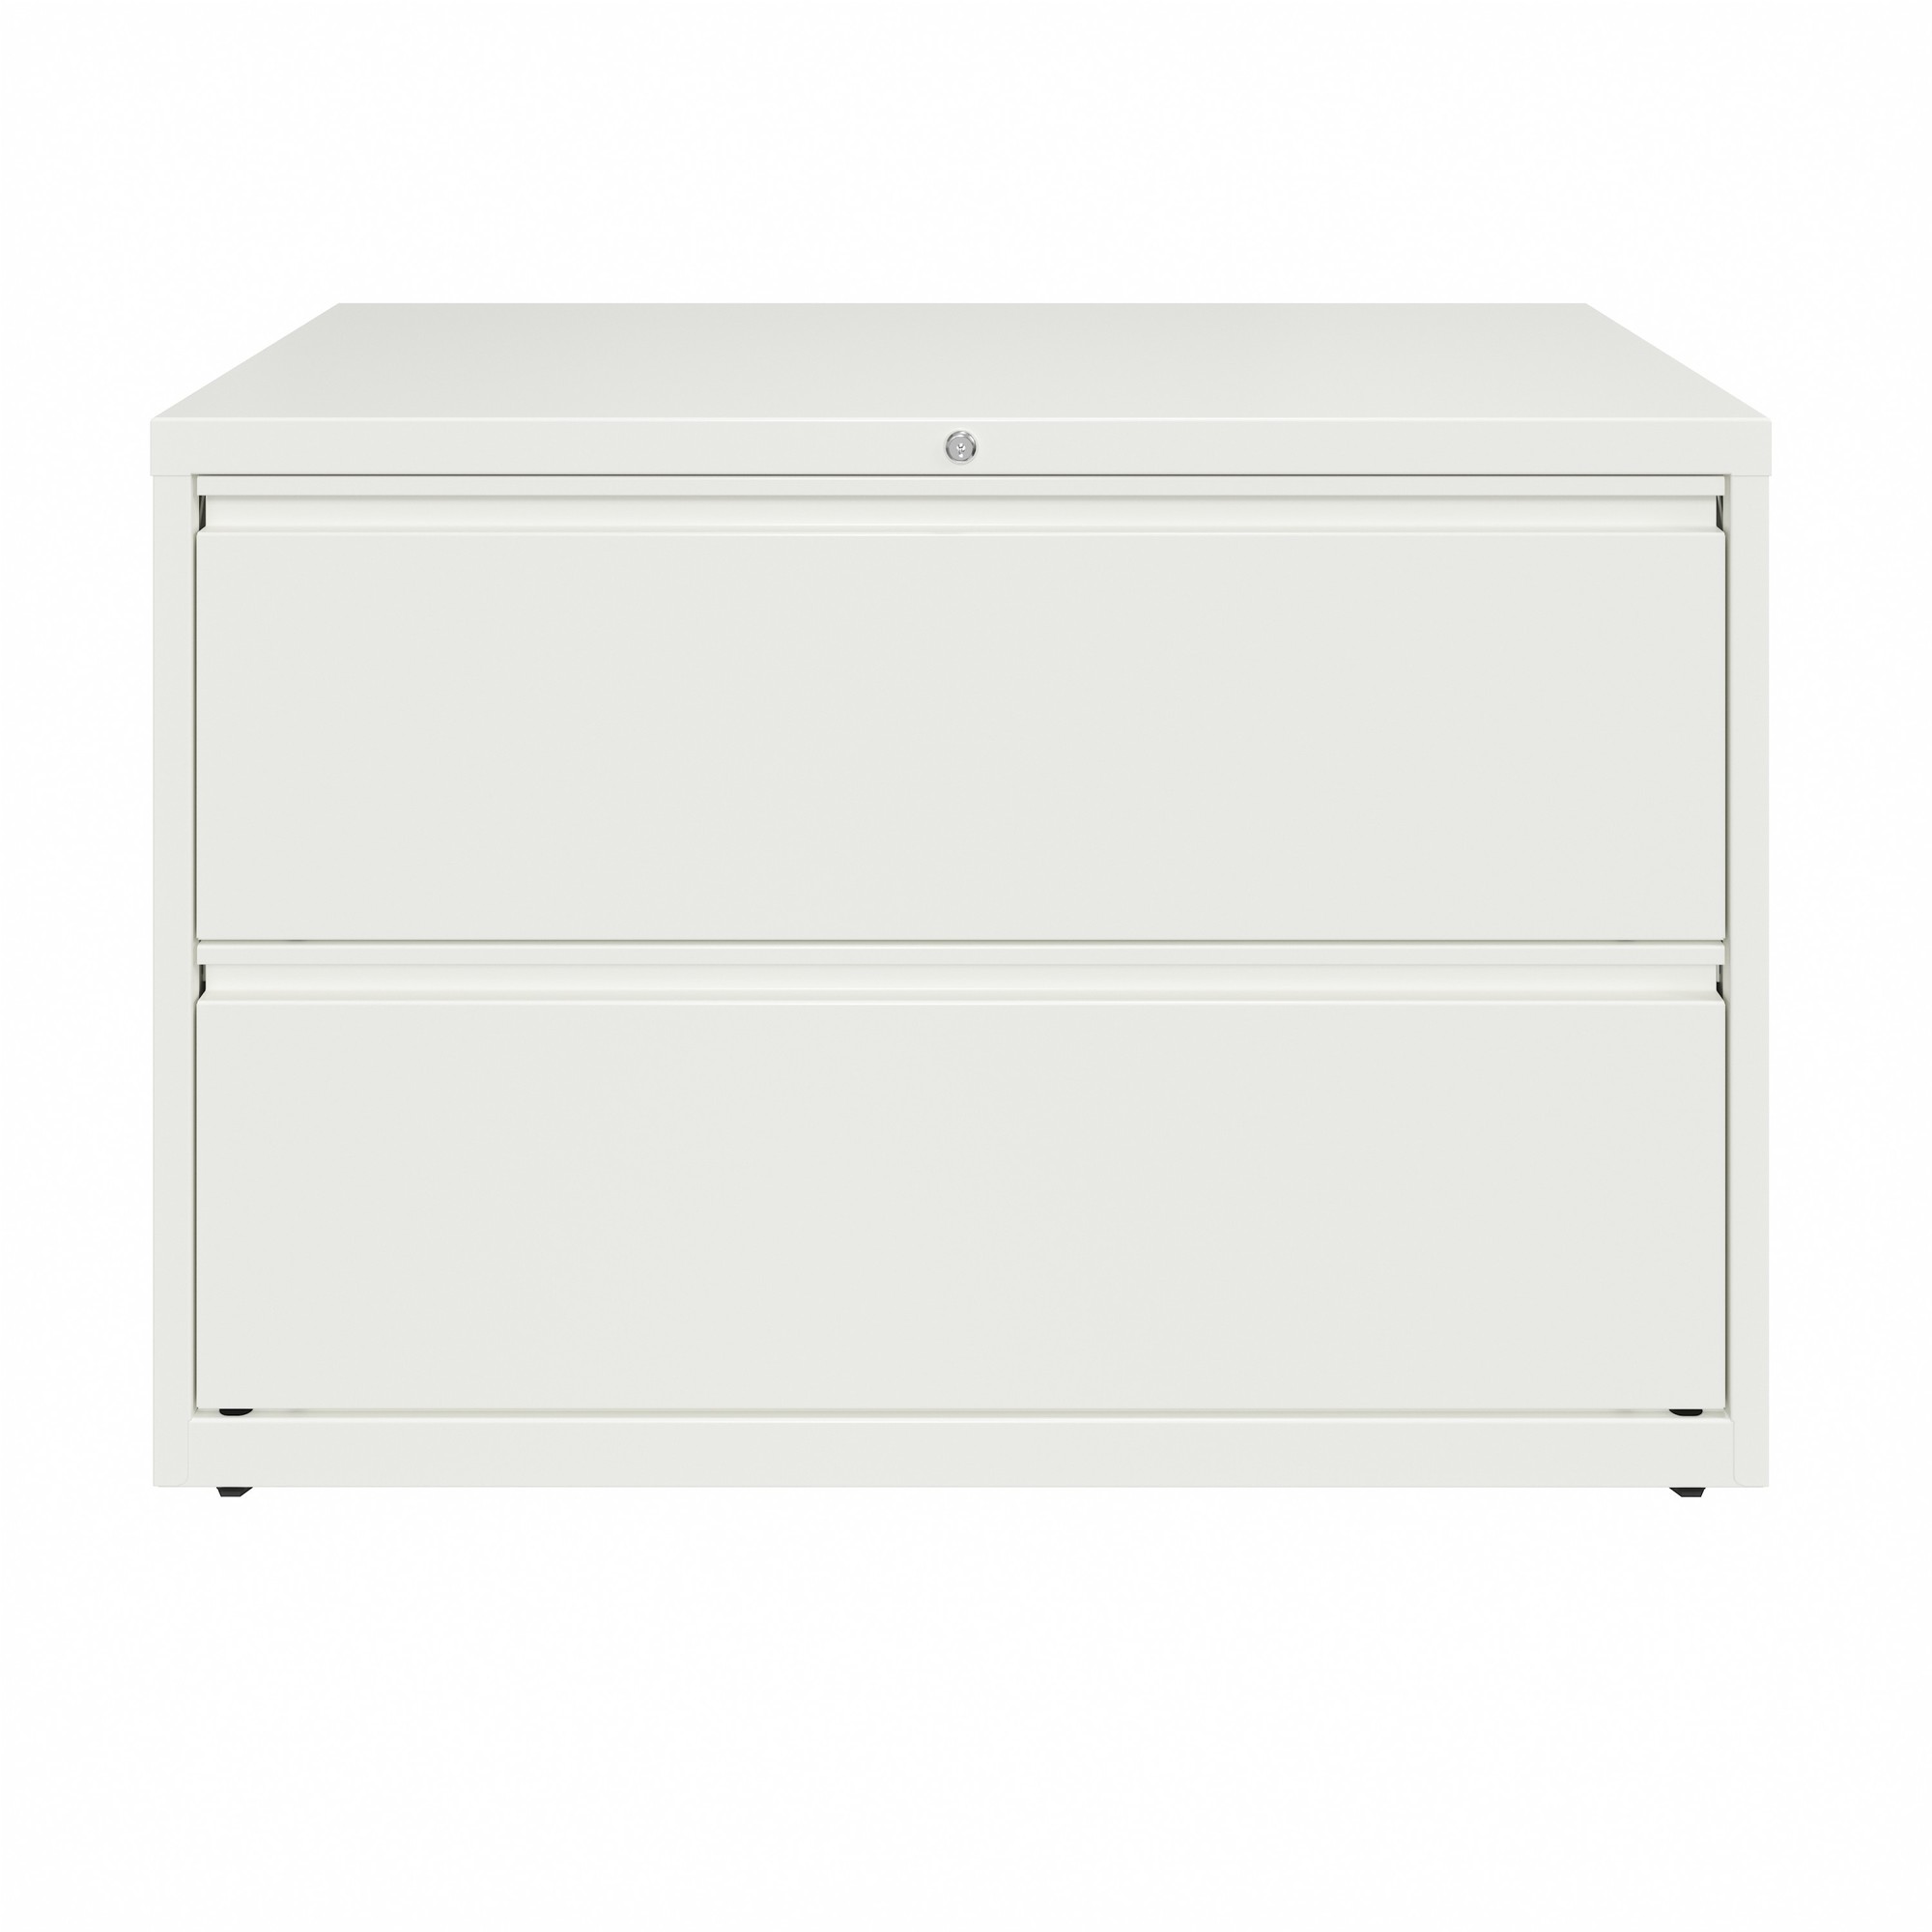 Hirsh Industries, 2 Drawer Lateral File Cabinet, Width 42 in, Depth 18.625 in, Height 28 in, Model 23704